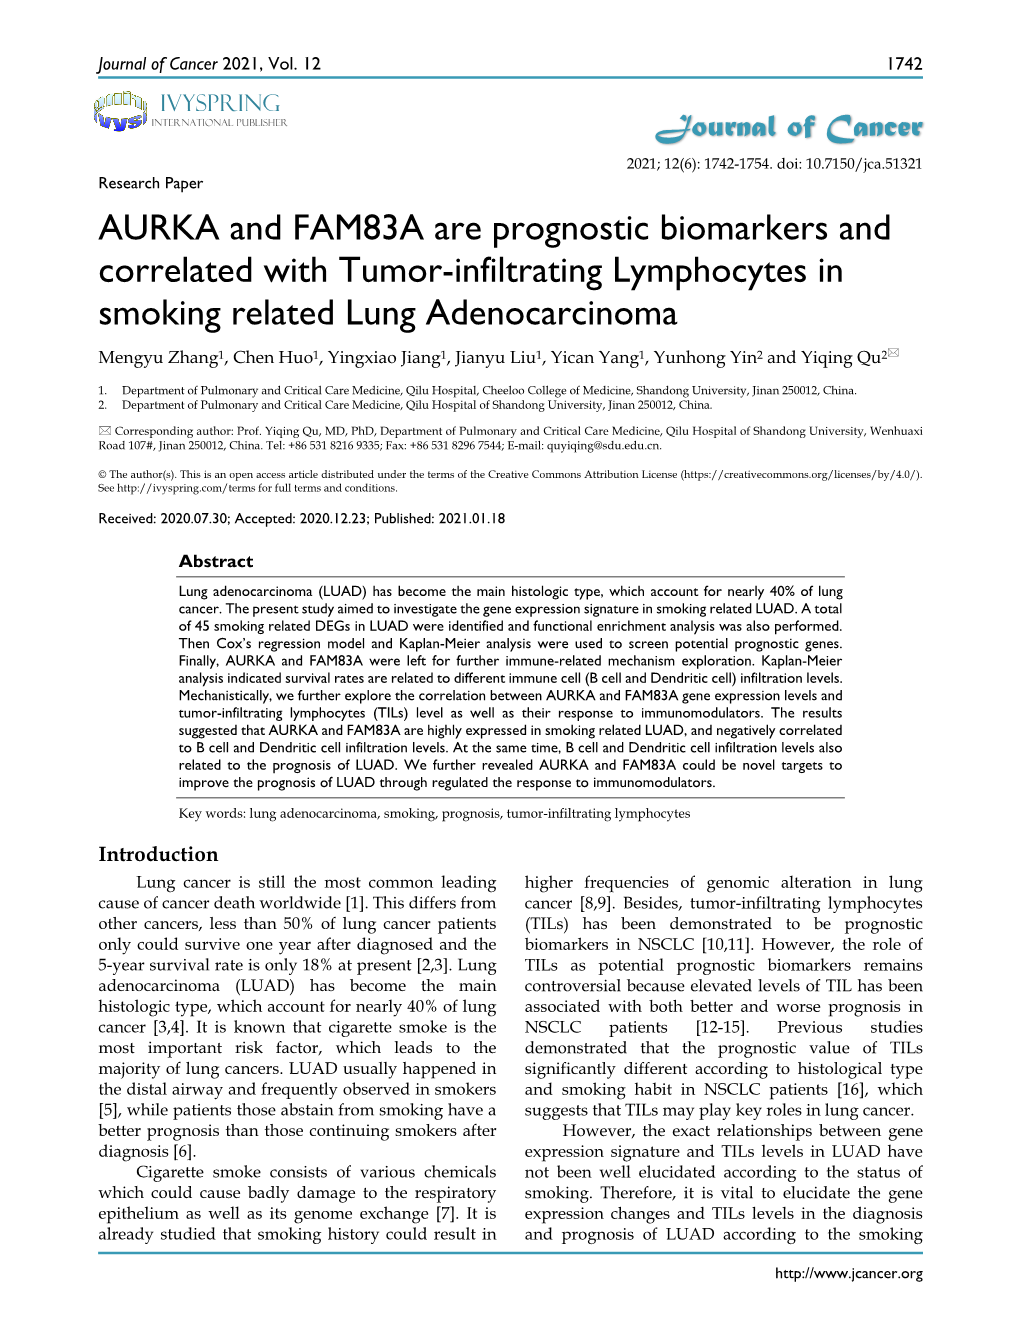 AURKA and FAM83A Are Prognostic Biomarkers and Correlated With